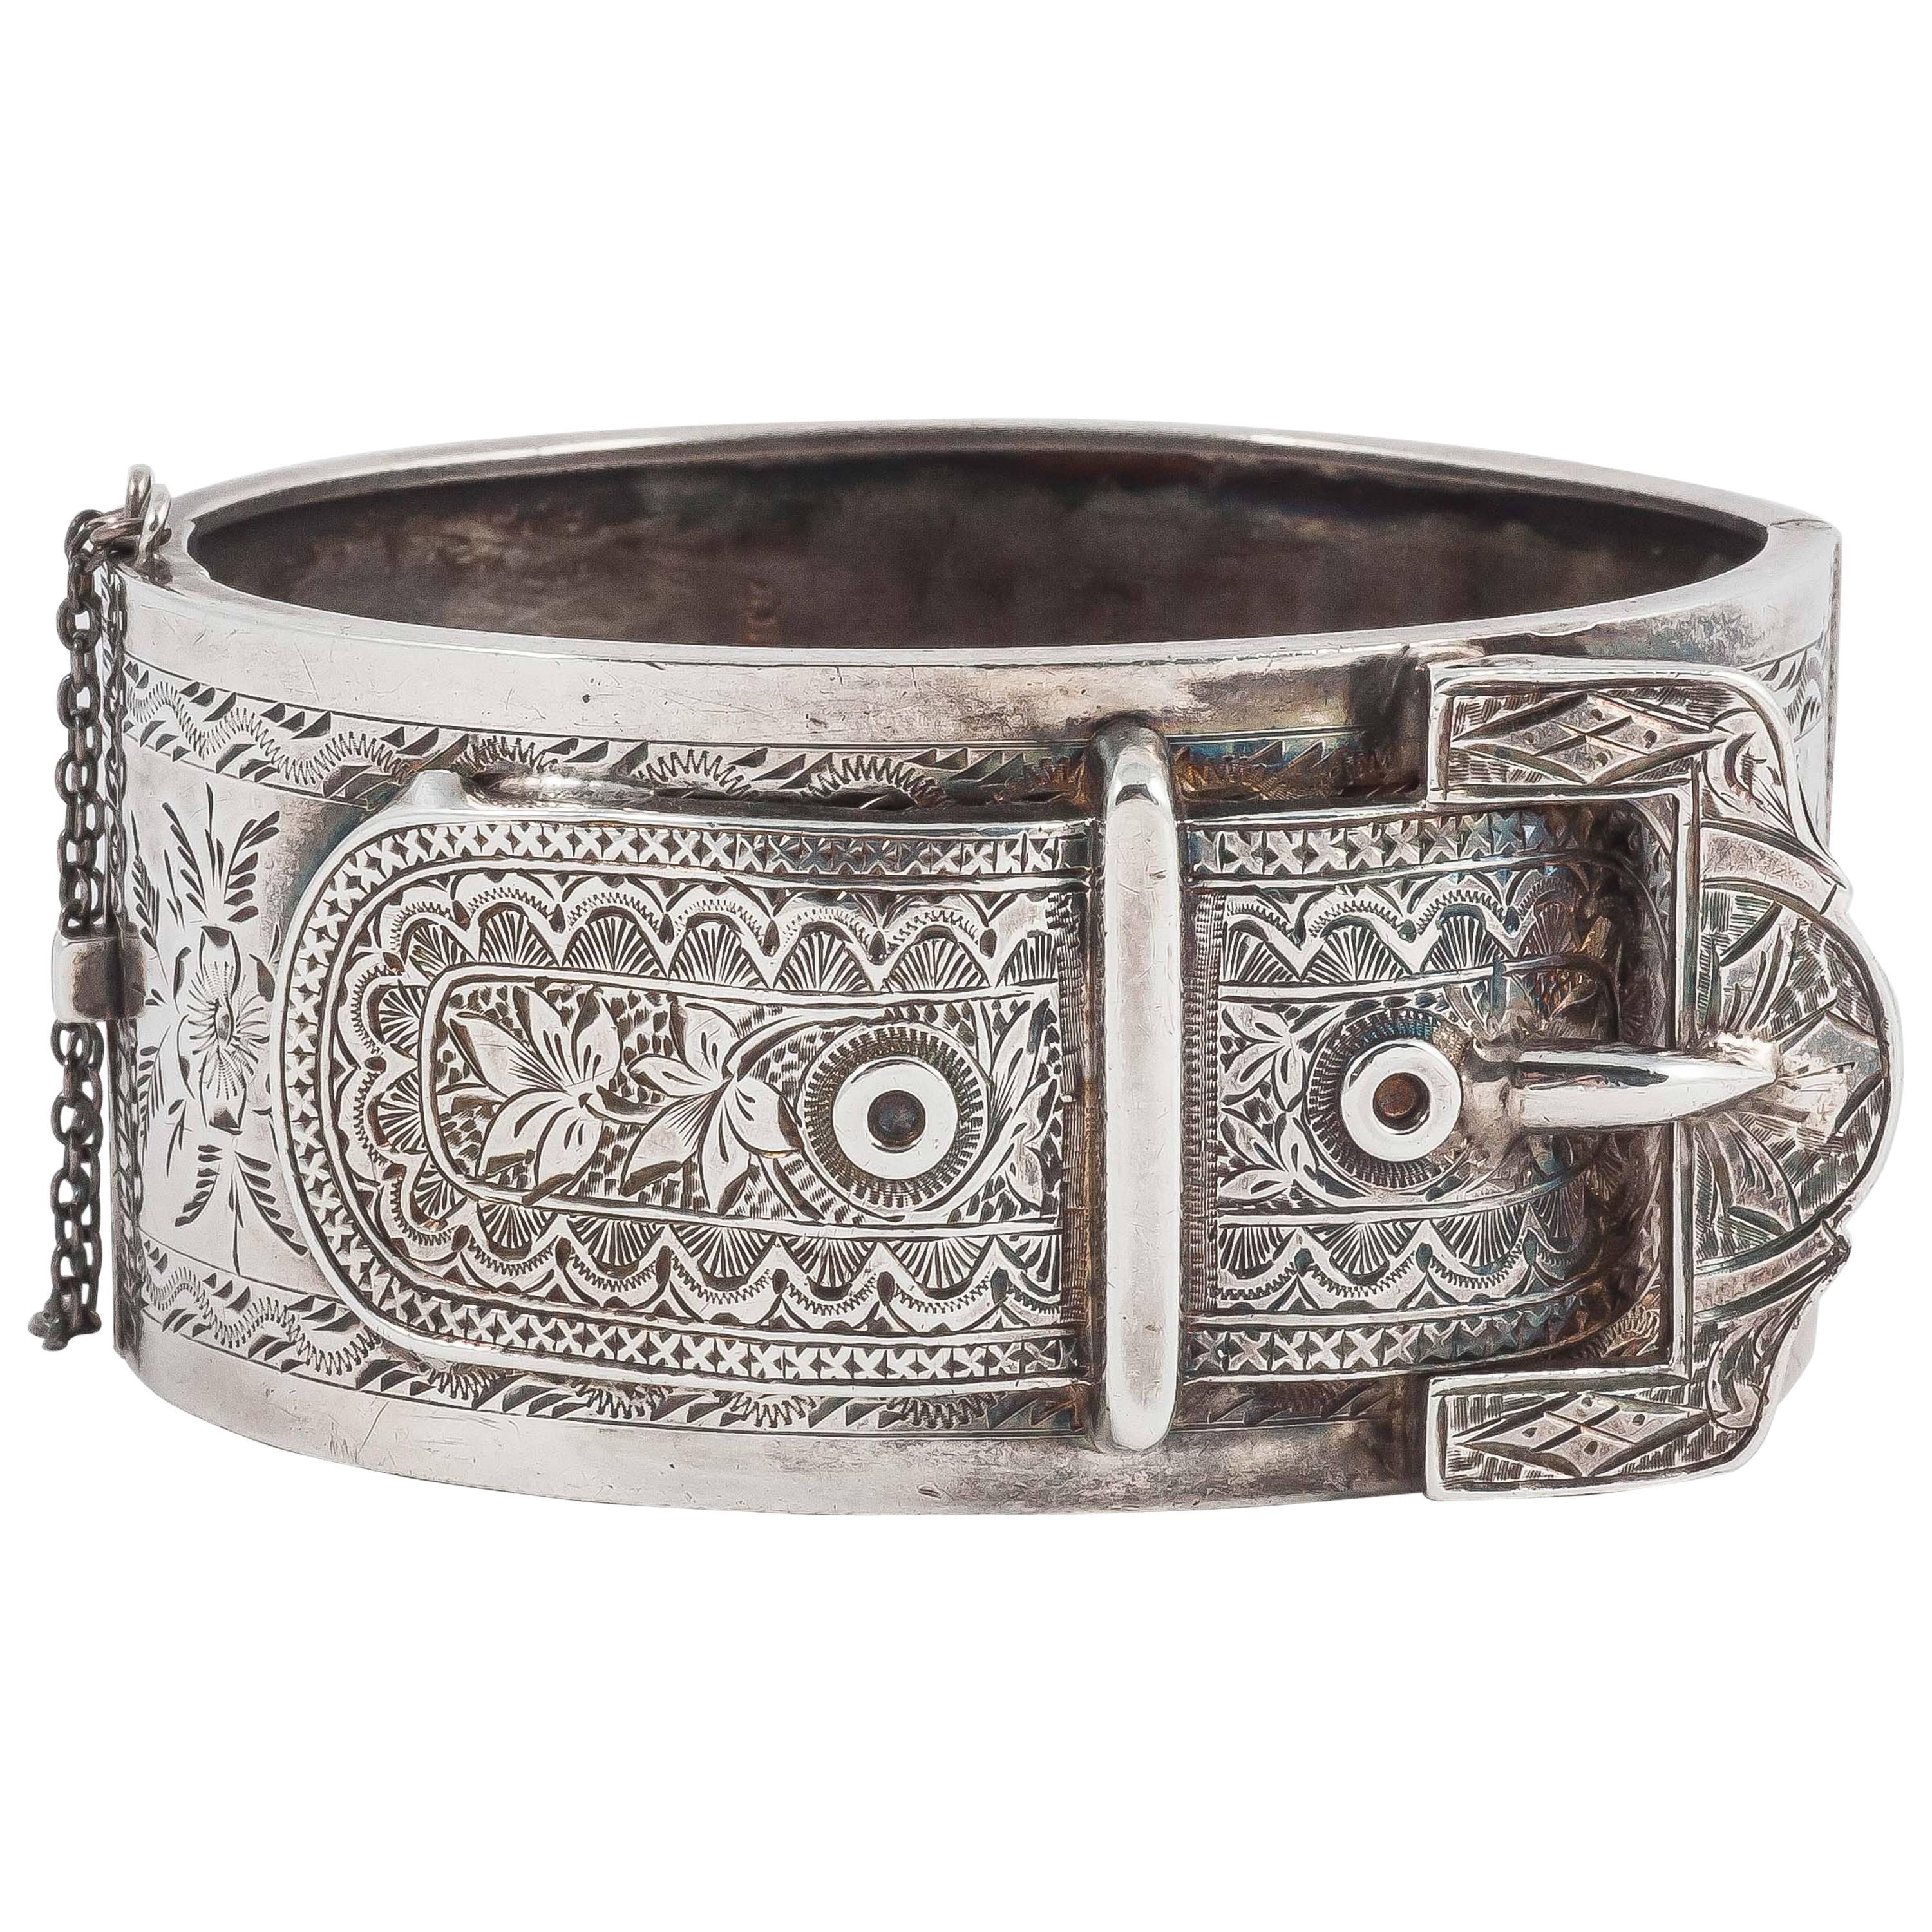 Lovely English Victorian silver buckle cuff bracelet